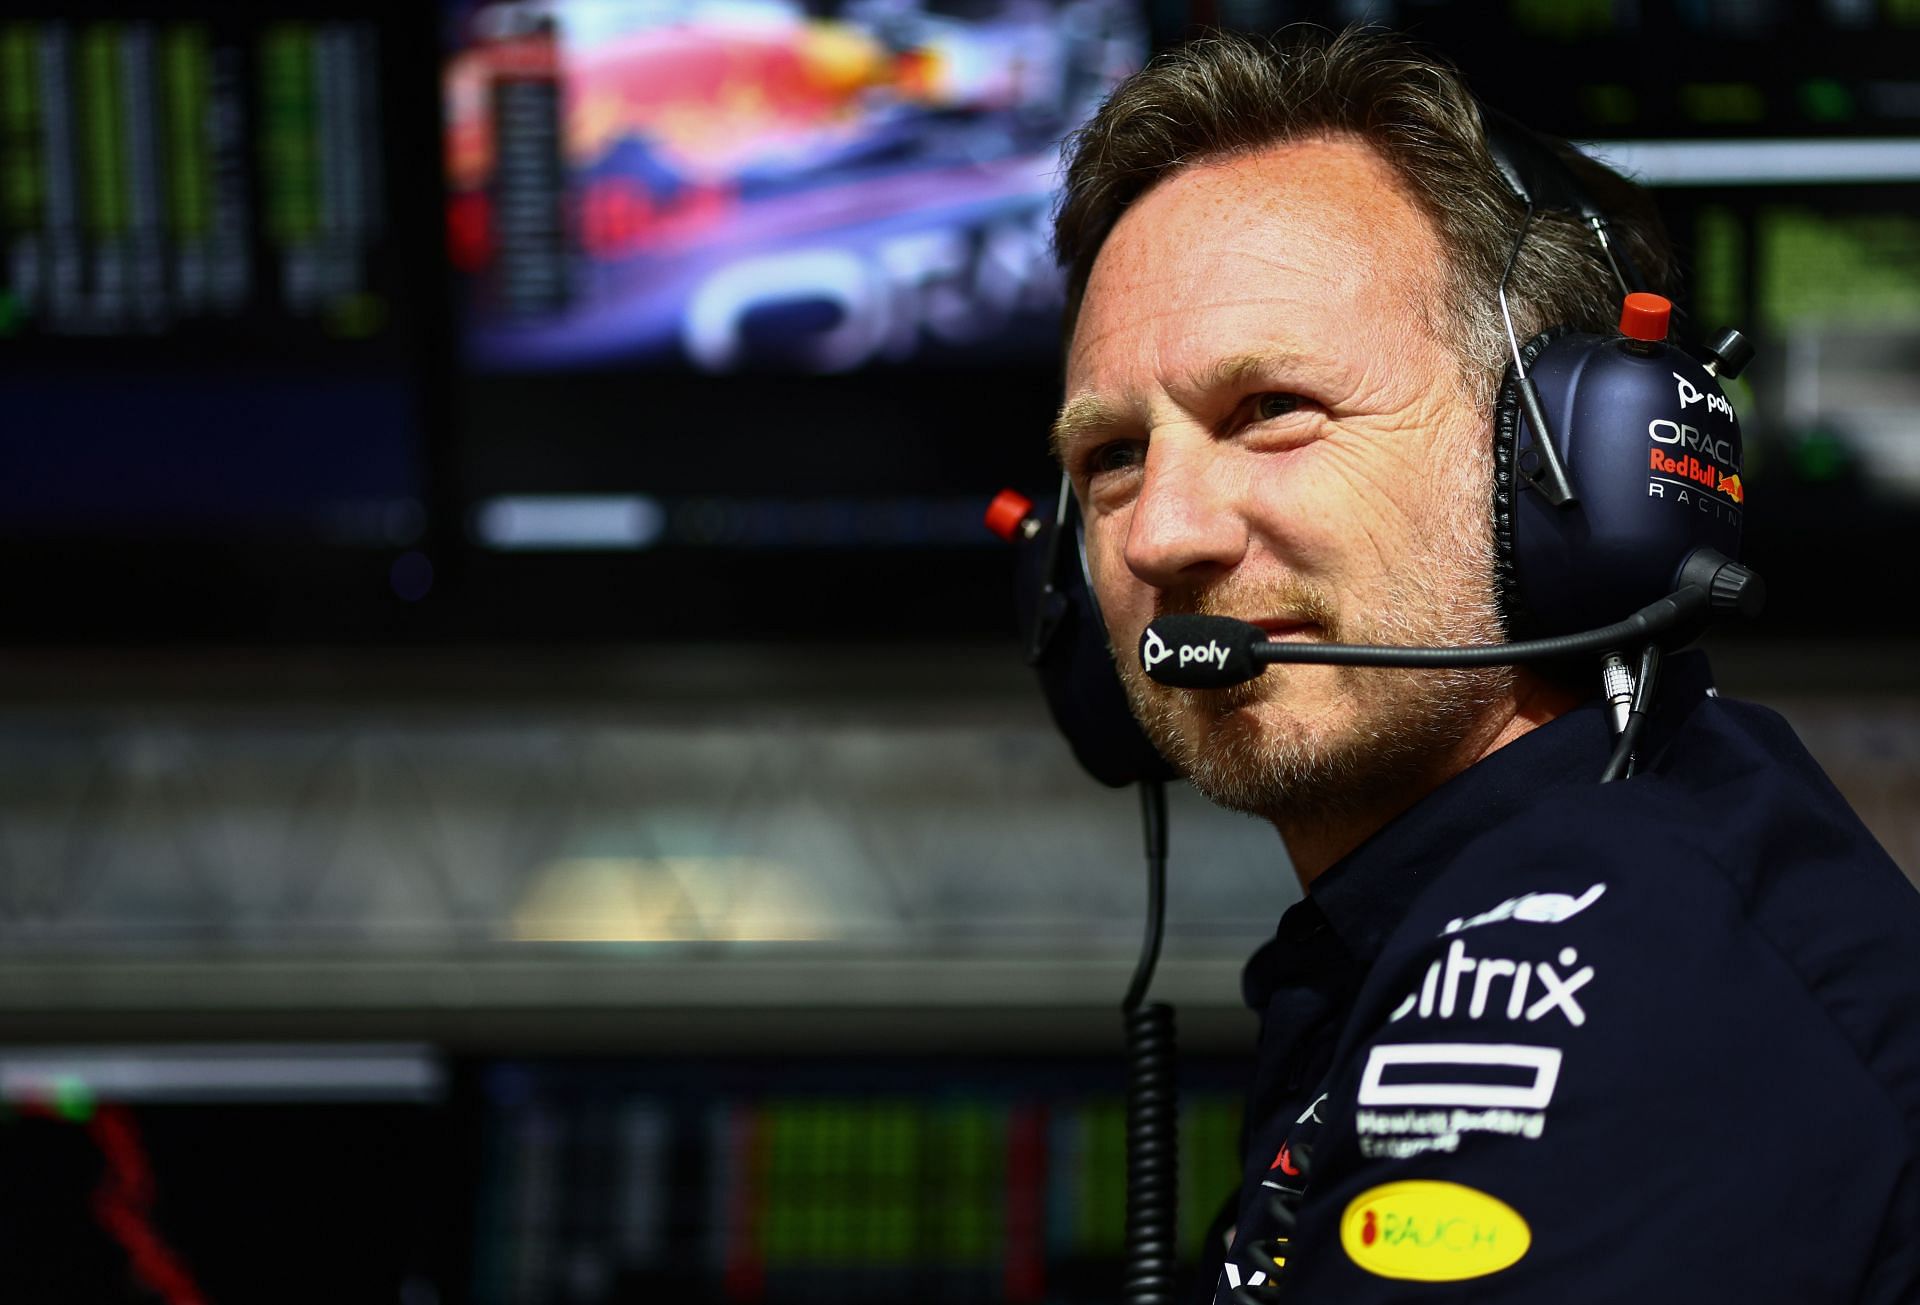 Christian Horner felt that the DRS detection point needed a rethink after the Saudi Arabian GP